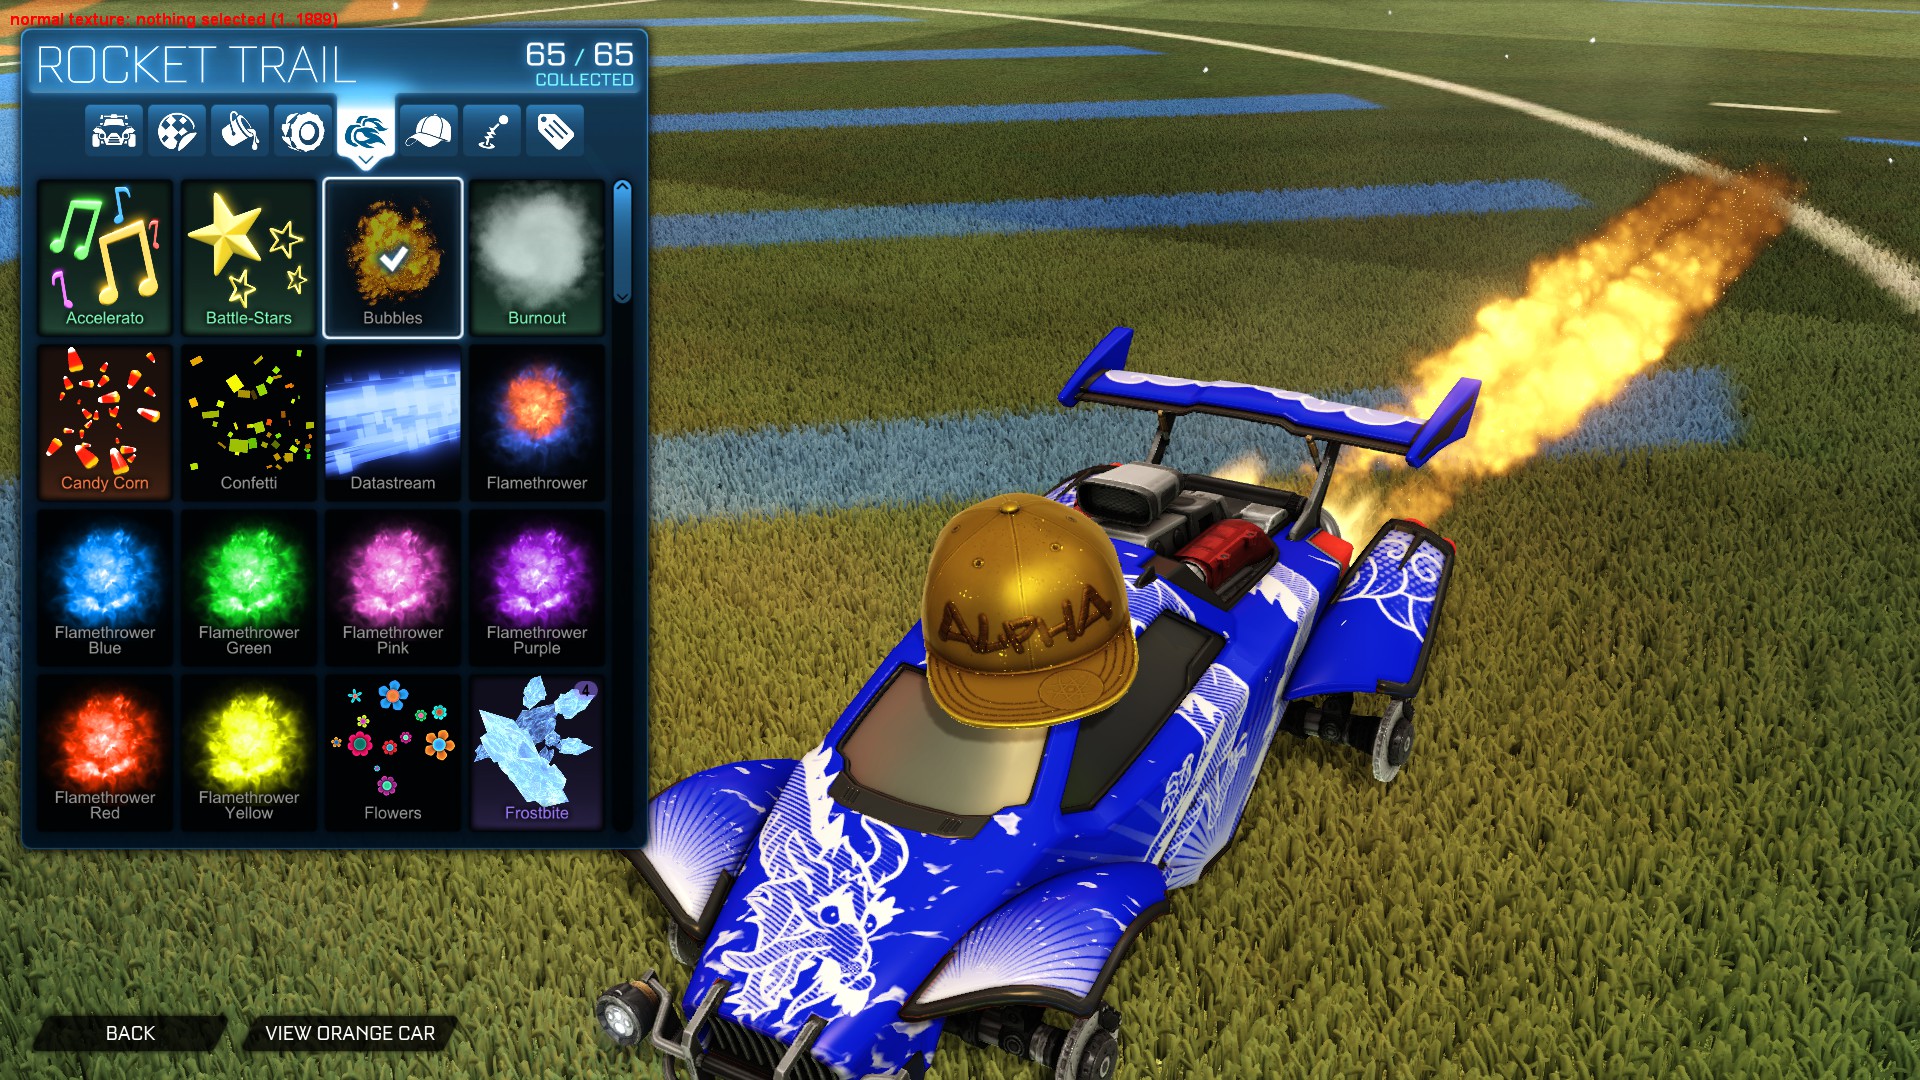 [OLD]alpha boost(gold rush) [ONLY WORKS IF YOU HAVE GOLD RUSH!]